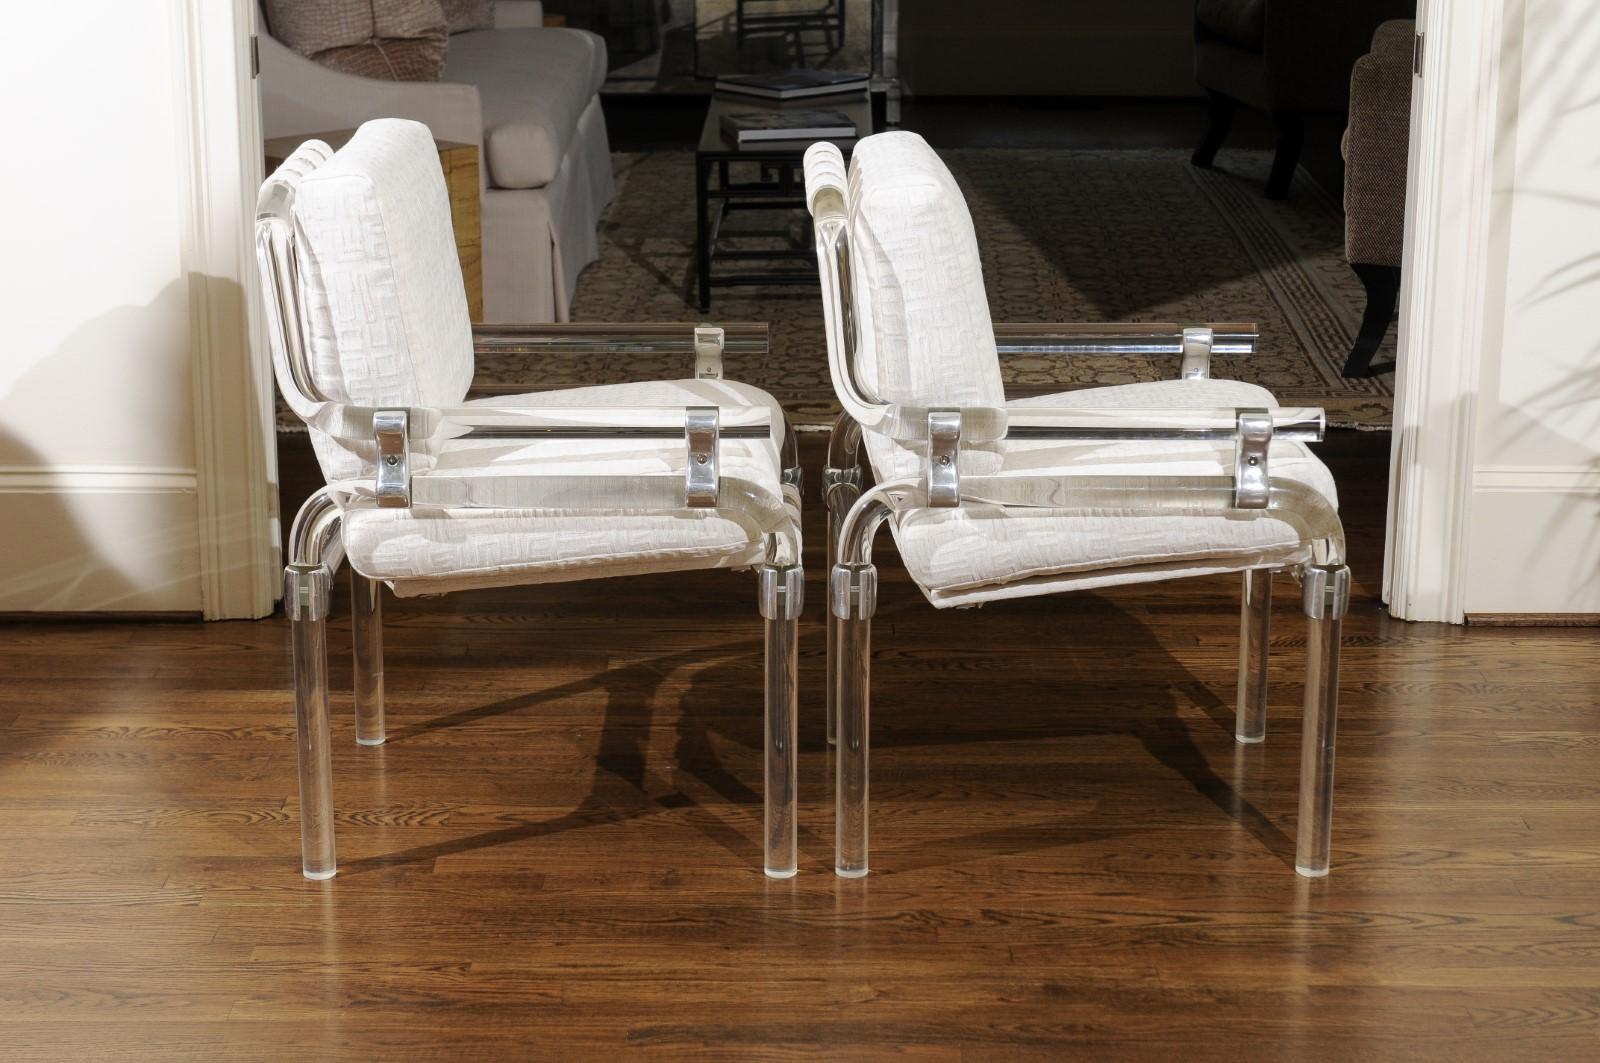 Aluminum Staggering Set of 8 Lucite Arm Dining Chairs by Jeff Messerschmidt, 1985 For Sale